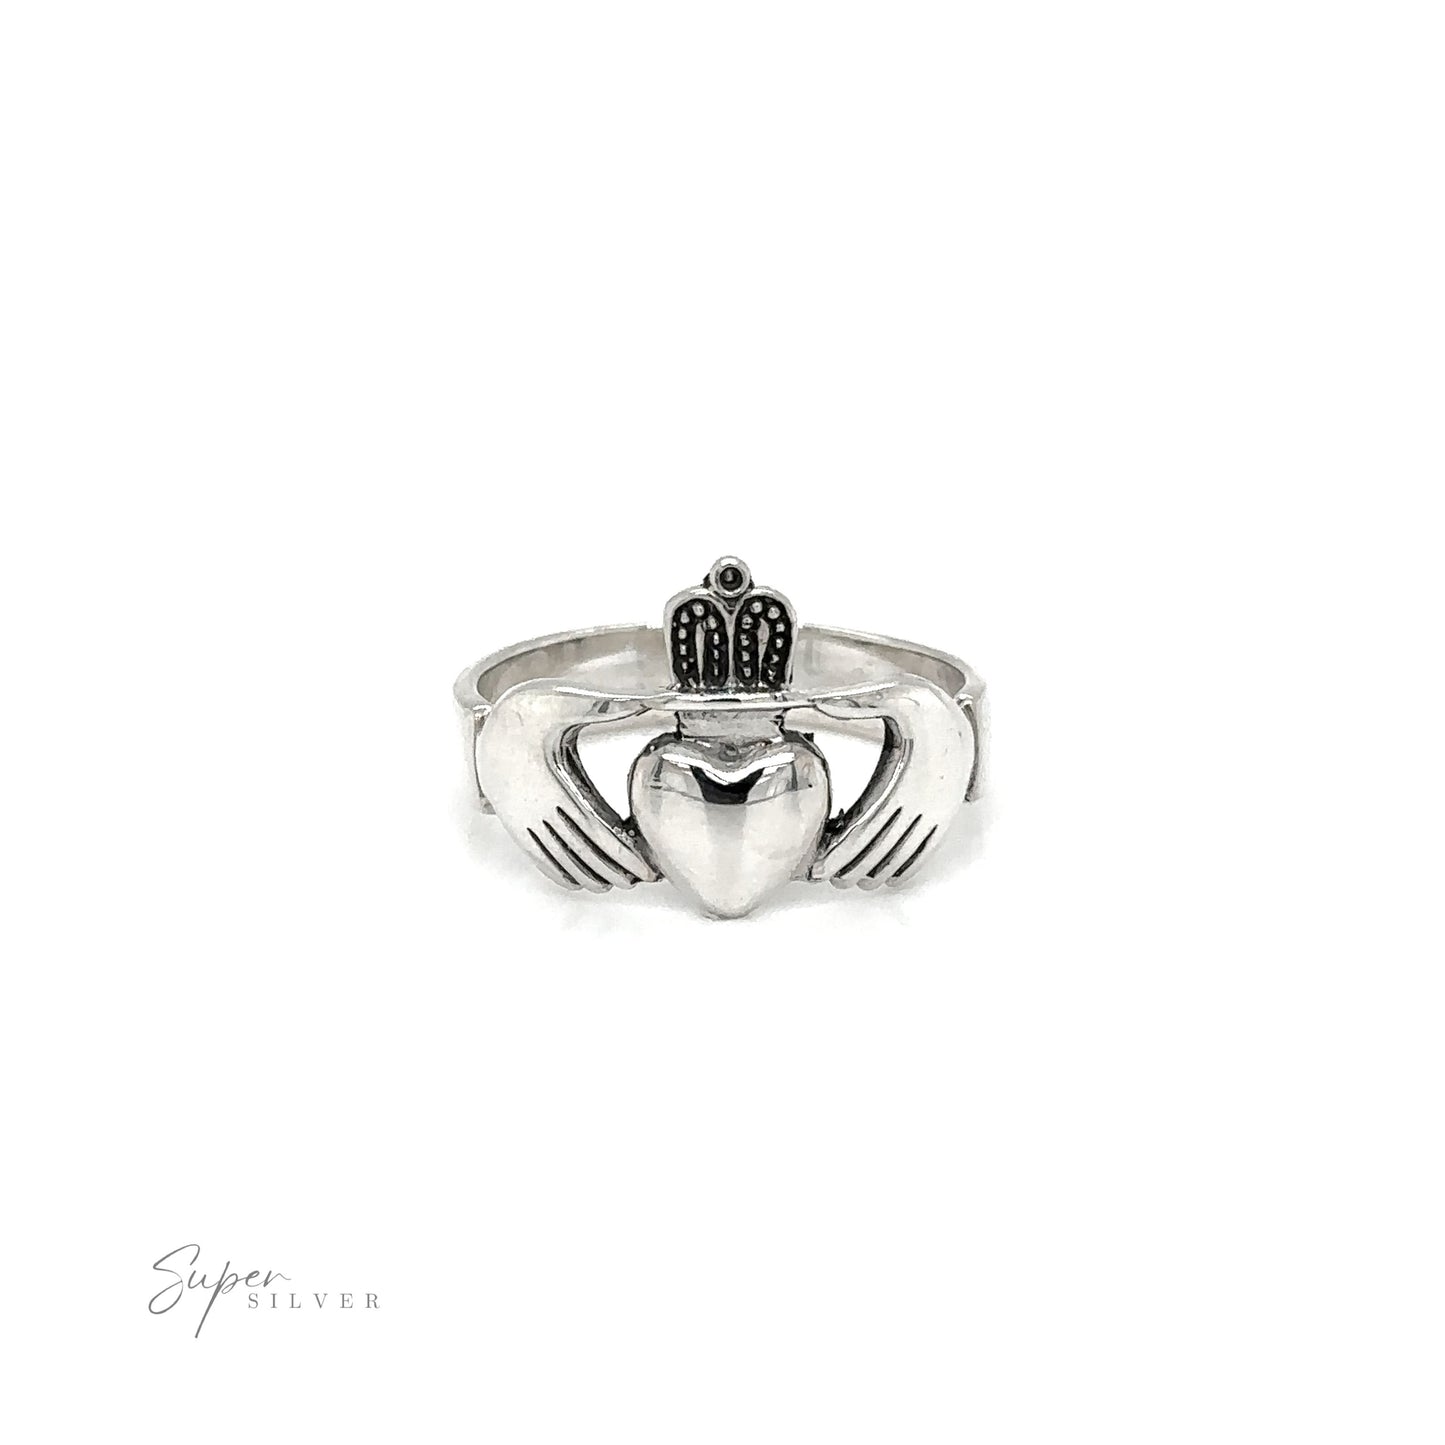 A silver Thick Claddagh ring featuring a crown and heart, symbolizing loyalty and love.